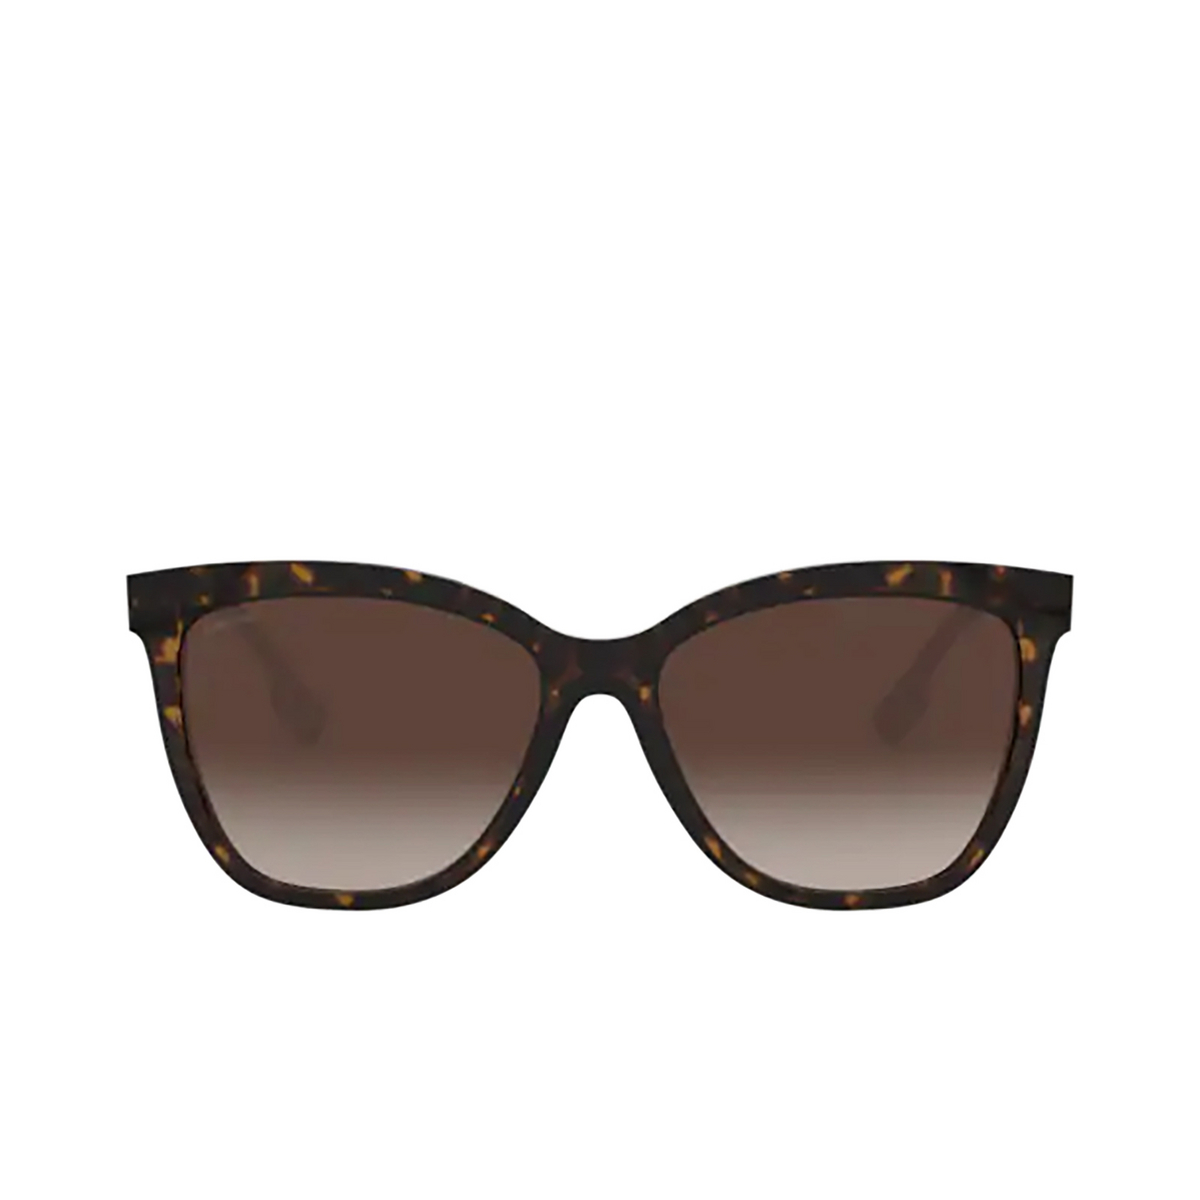 Burberry® Square Sunglasses: BE4308 Clare color 385413 Dark Havana - front view